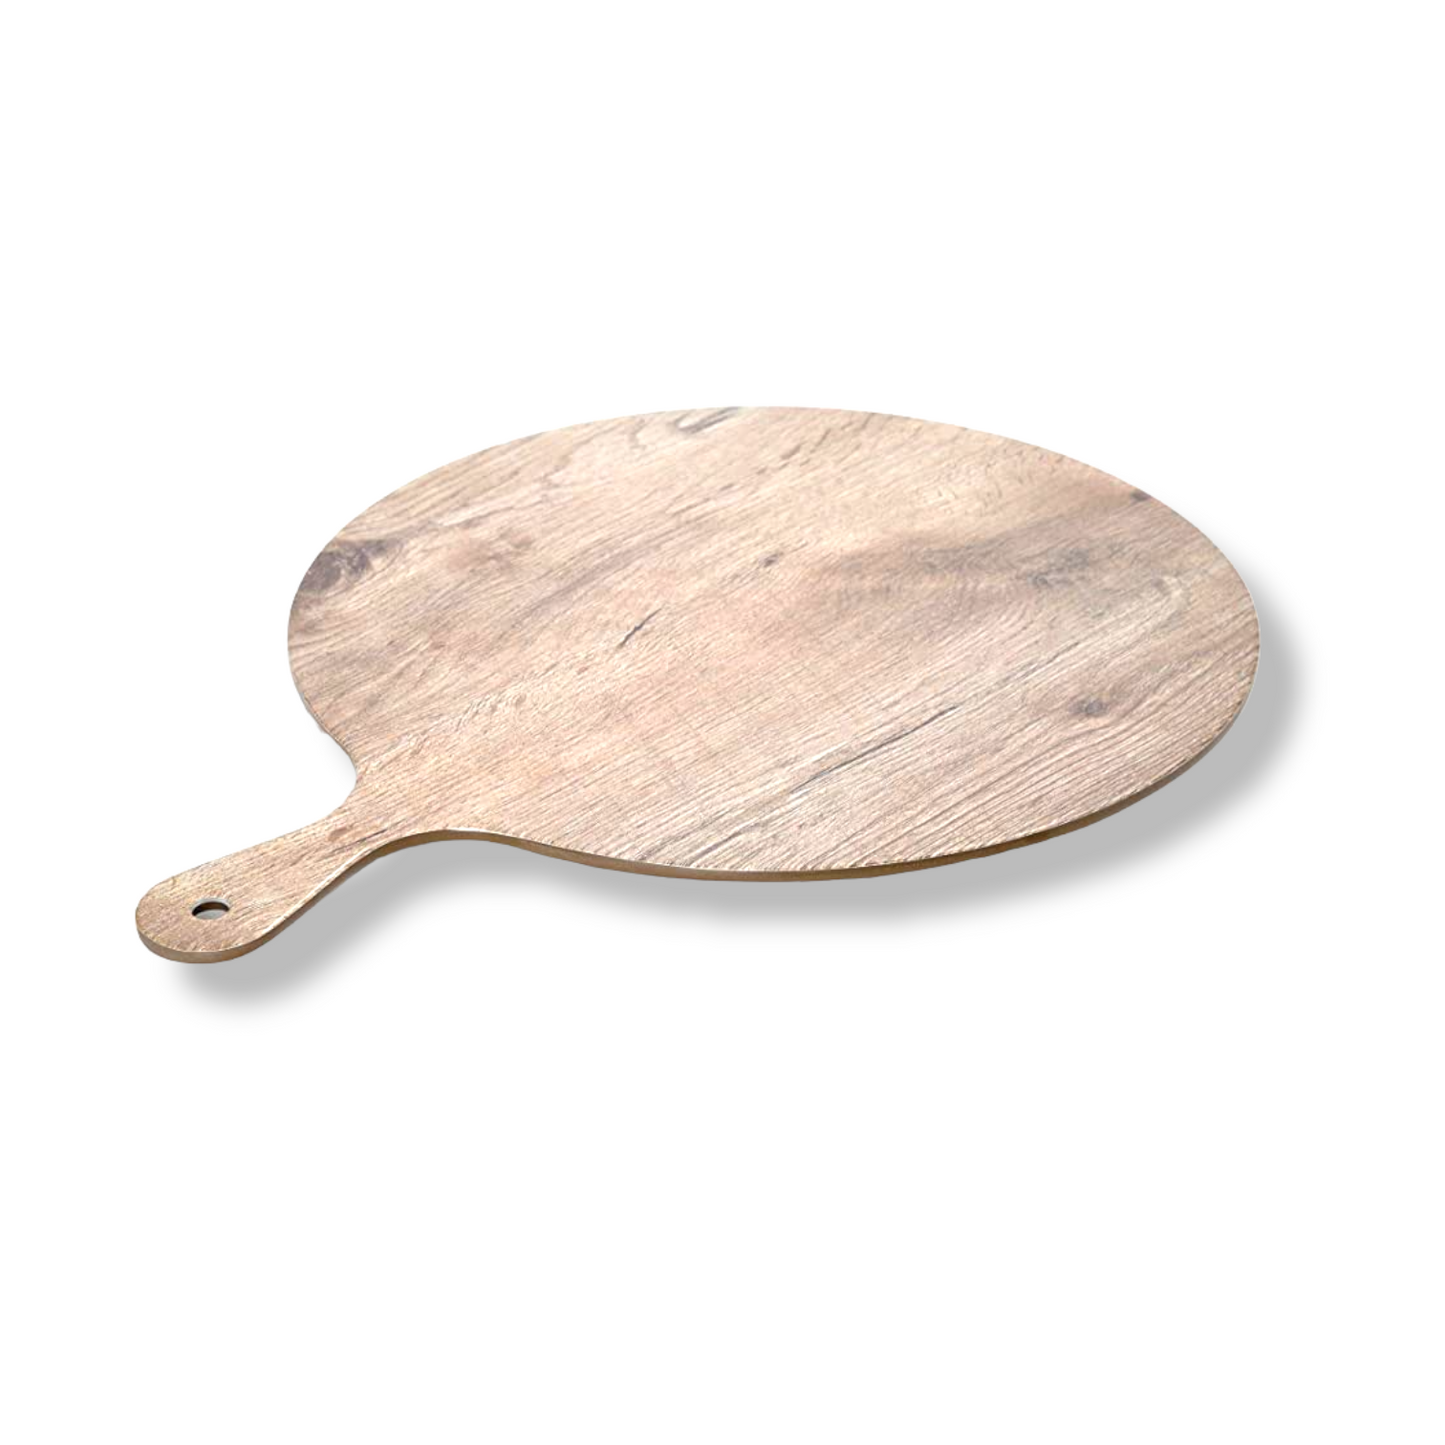 32cm Melamine round plate with a handle and a wooden-look finish - Lunaz Shop